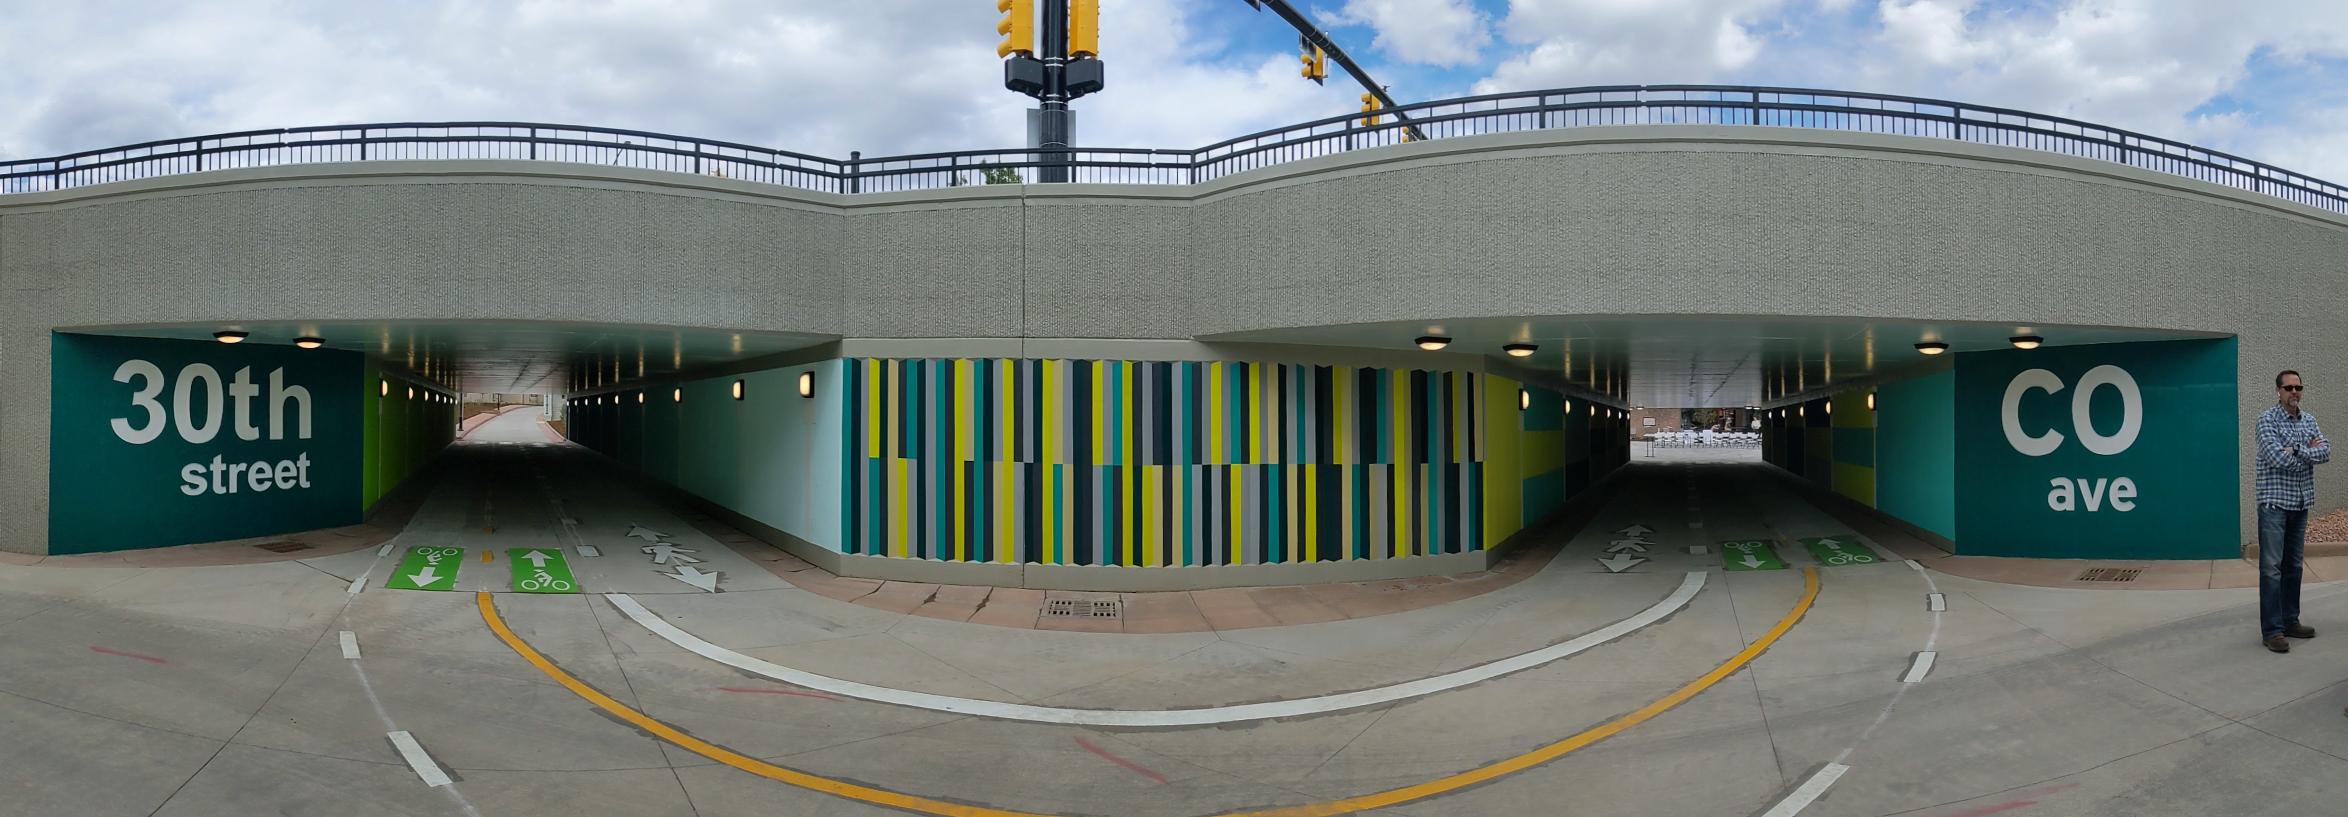 underpass at 30th Street and Colorado Avenue with art